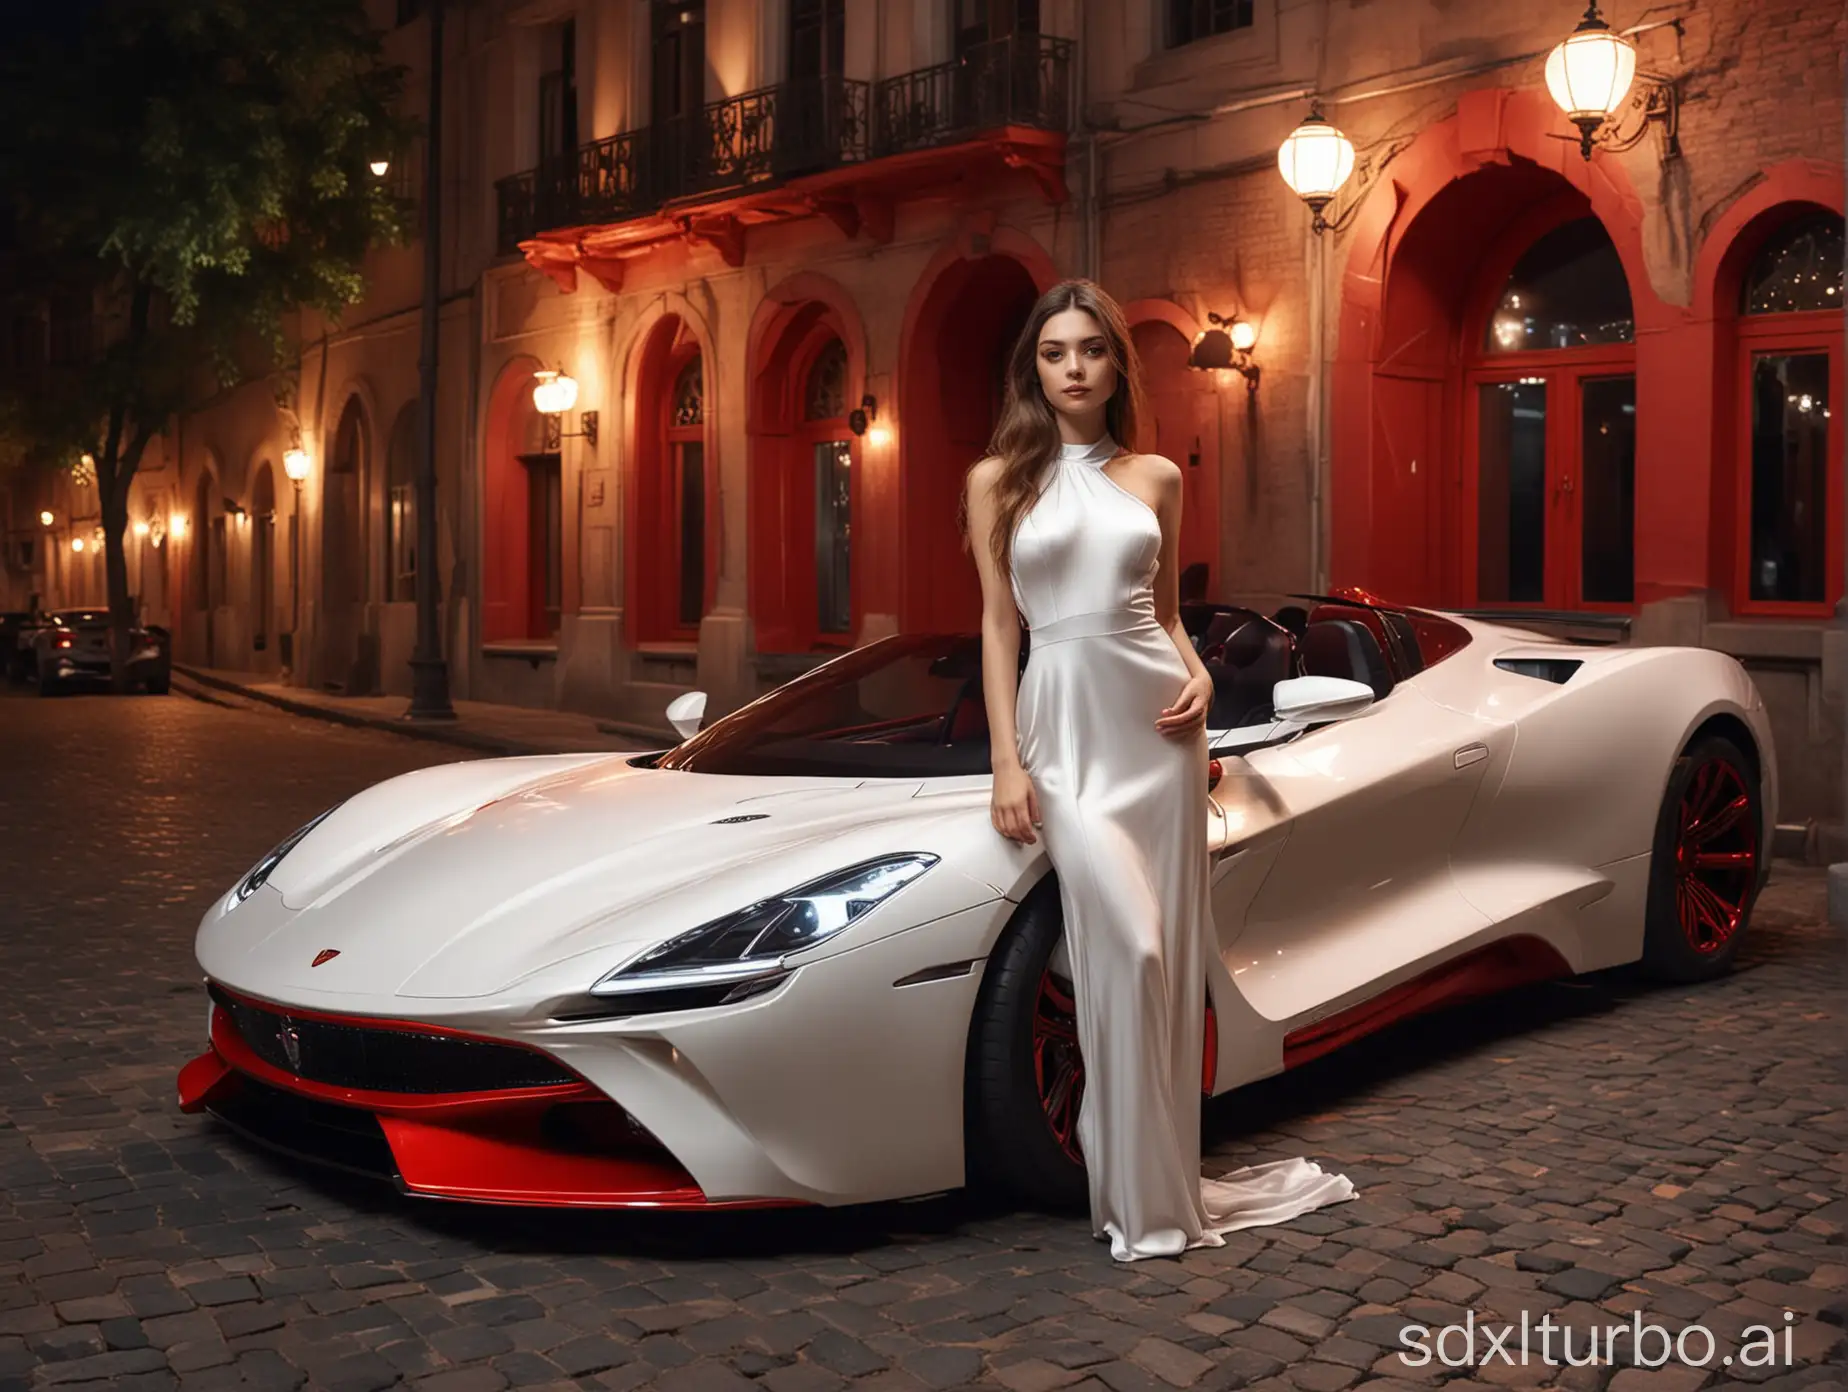 Elegant-Woman-in-White-Silk-Dress-by-Red-Luxury-Car-on-Night-City-Embankment